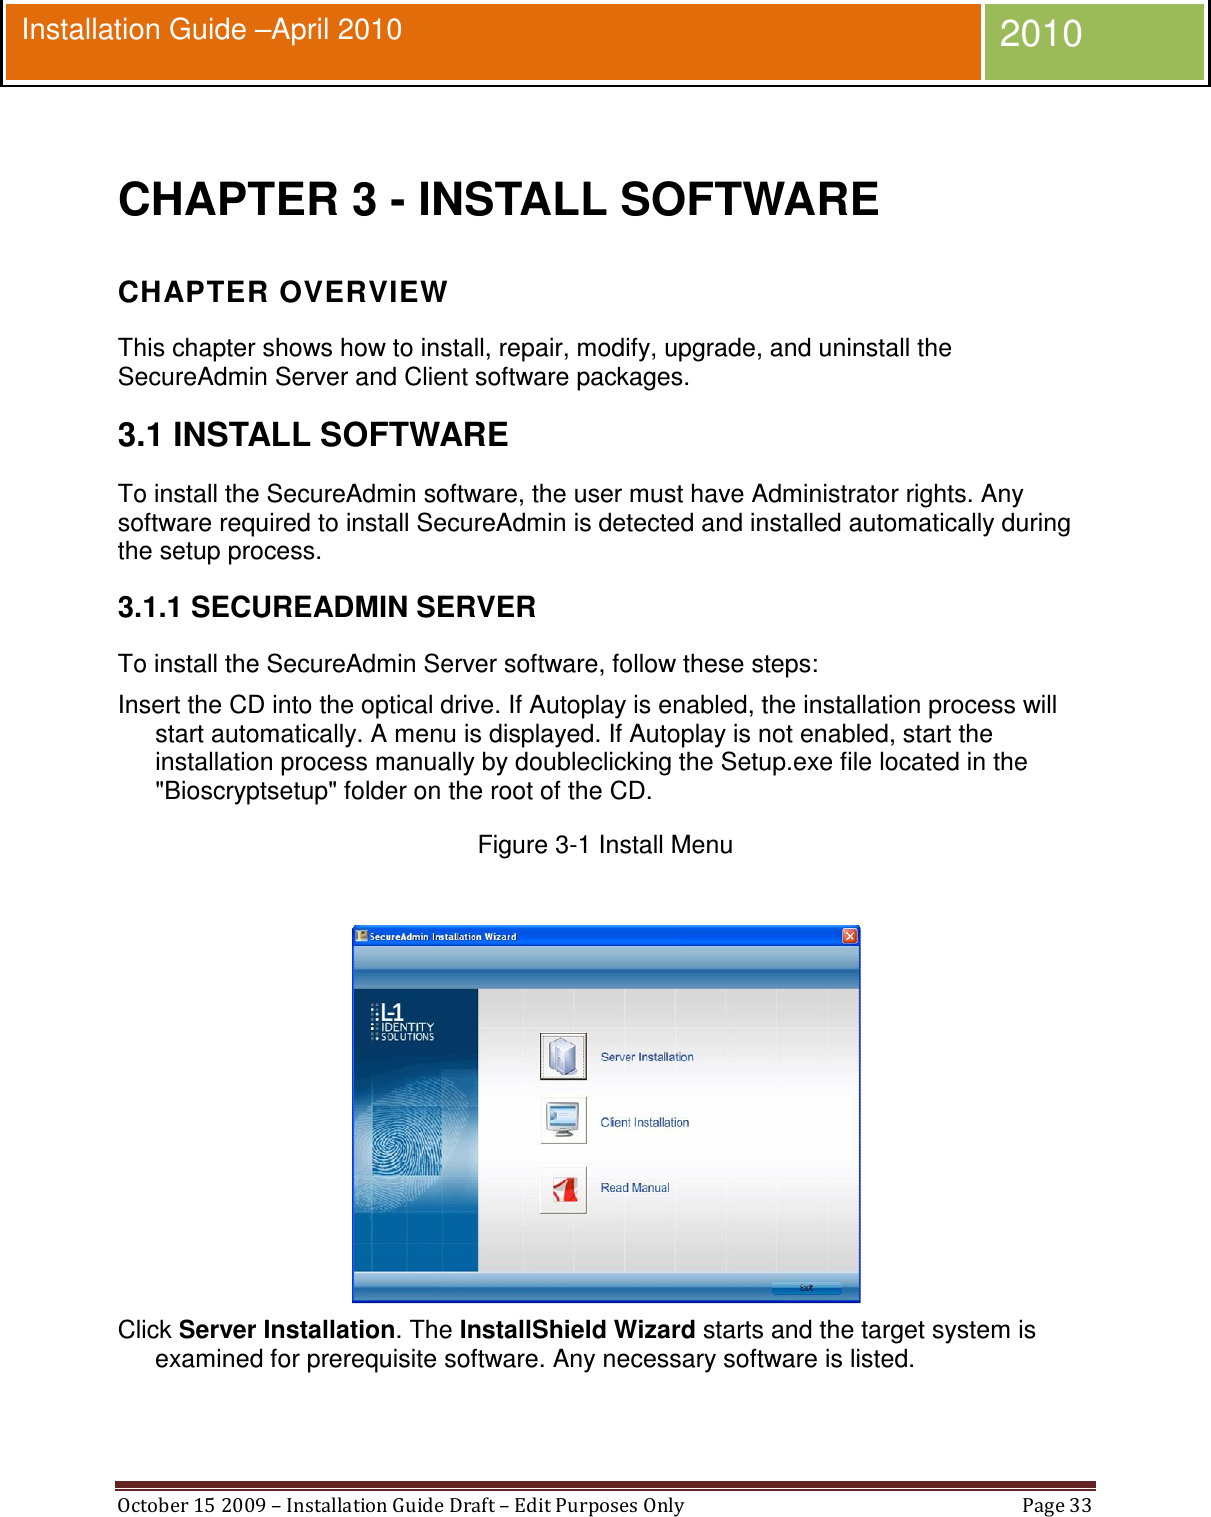  October 15 2009 – Installation Guide Draft – Edit Purposes Only  Page 33  Installation Guide –April 2010 2010  CHAPTER 3 - INSTALL SOFTWARE CHAPTER OVERVIEW This chapter shows how to install, repair, modify, upgrade, and uninstall the SecureAdmin Server and Client software packages. 3.1 INSTALL SOFTWARE To install the SecureAdmin software, the user must have Administrator rights. Any software required to install SecureAdmin is detected and installed automatically during the setup process. 3.1.1 SECUREADMIN SERVER To install the SecureAdmin Server software, follow these steps: Insert the CD into the optical drive. If Autoplay is enabled, the installation process will start automatically. A menu is displayed. If Autoplay is not enabled, start the installation process manually by doubleclicking the Setup.exe file located in the &quot;Bioscryptsetup&quot; folder on the root of the CD. Figure 3-1 Install Menu   Click Server Installation. The InstallShield Wizard starts and the target system is examined for prerequisite software. Any necessary software is listed. 